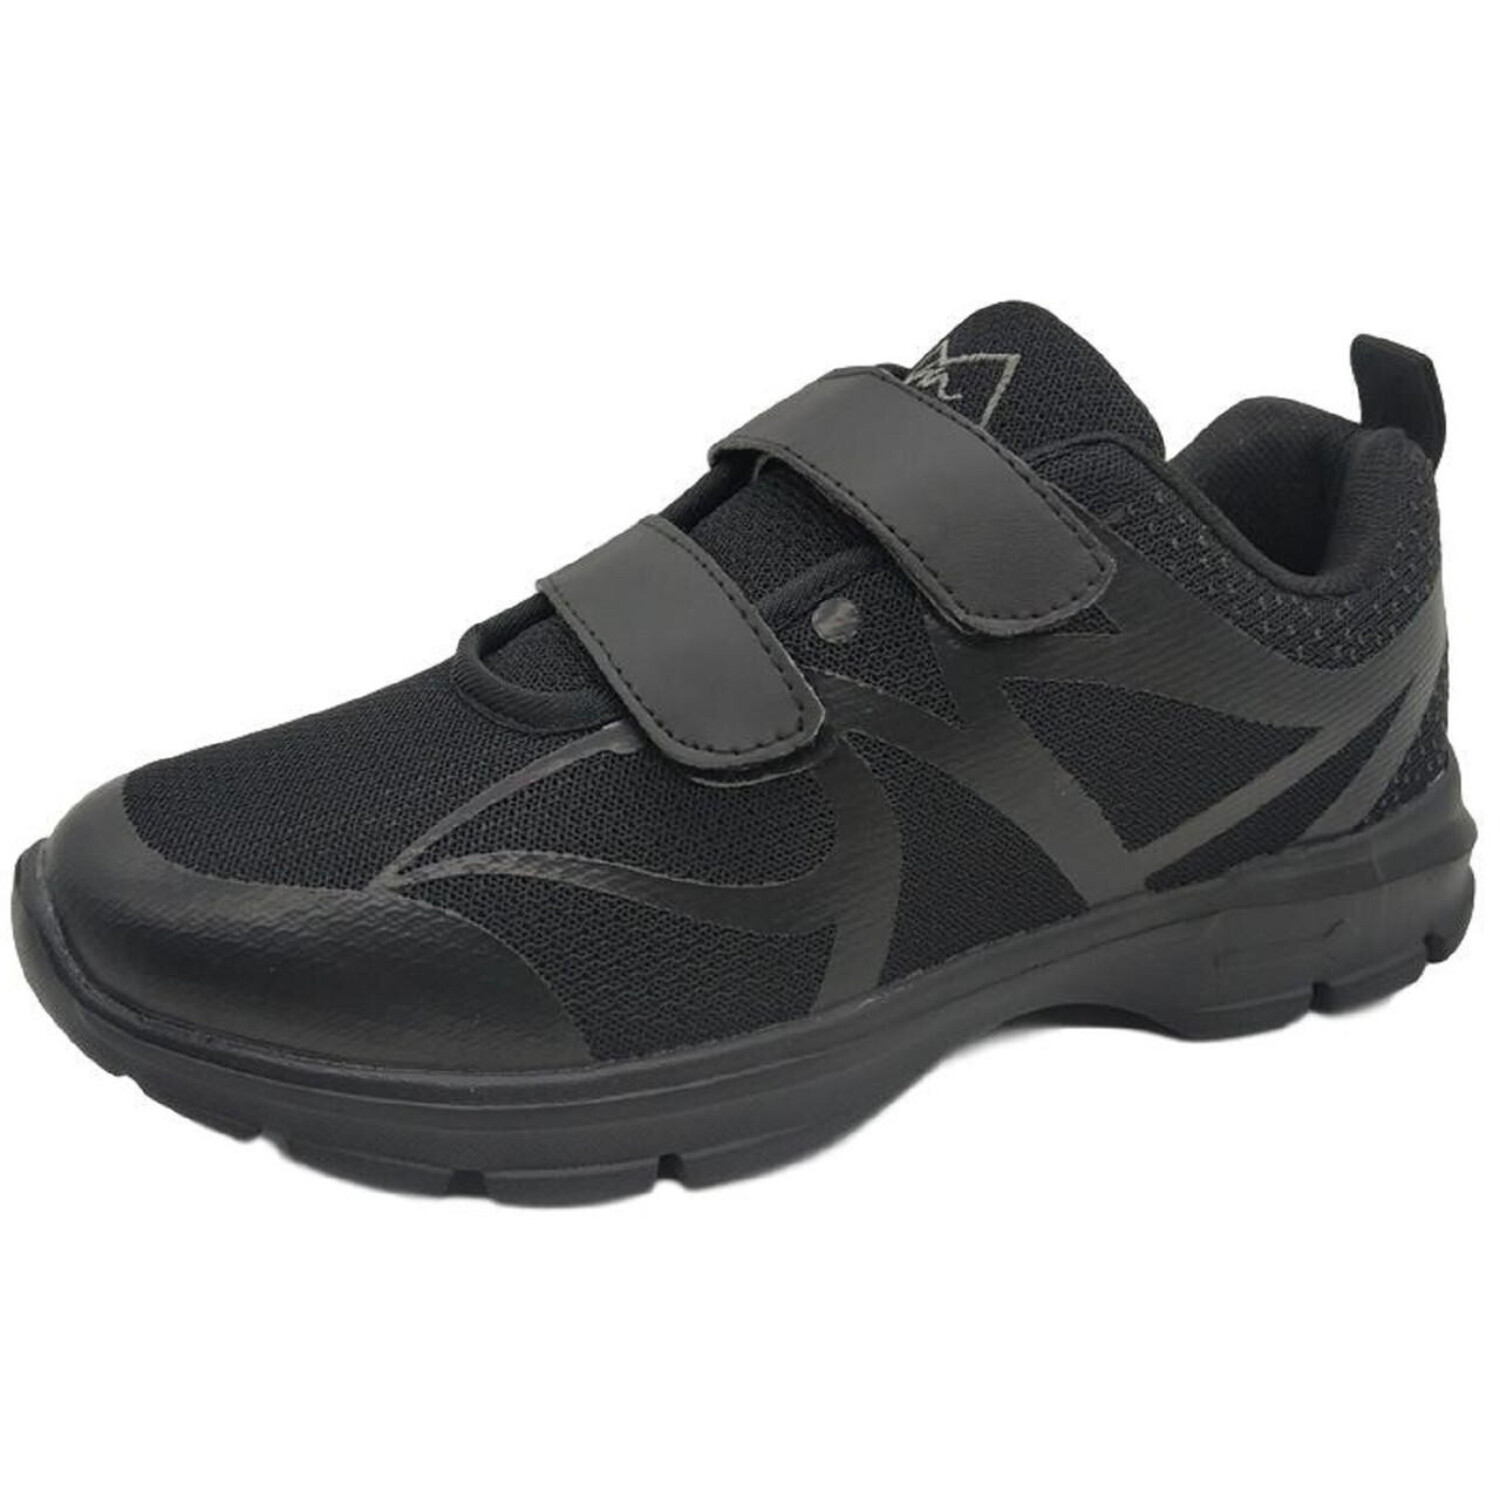 M-AIR Athletic Mesh Hook-and-Loop Pacer Sneakers for Women - image 1 of 5